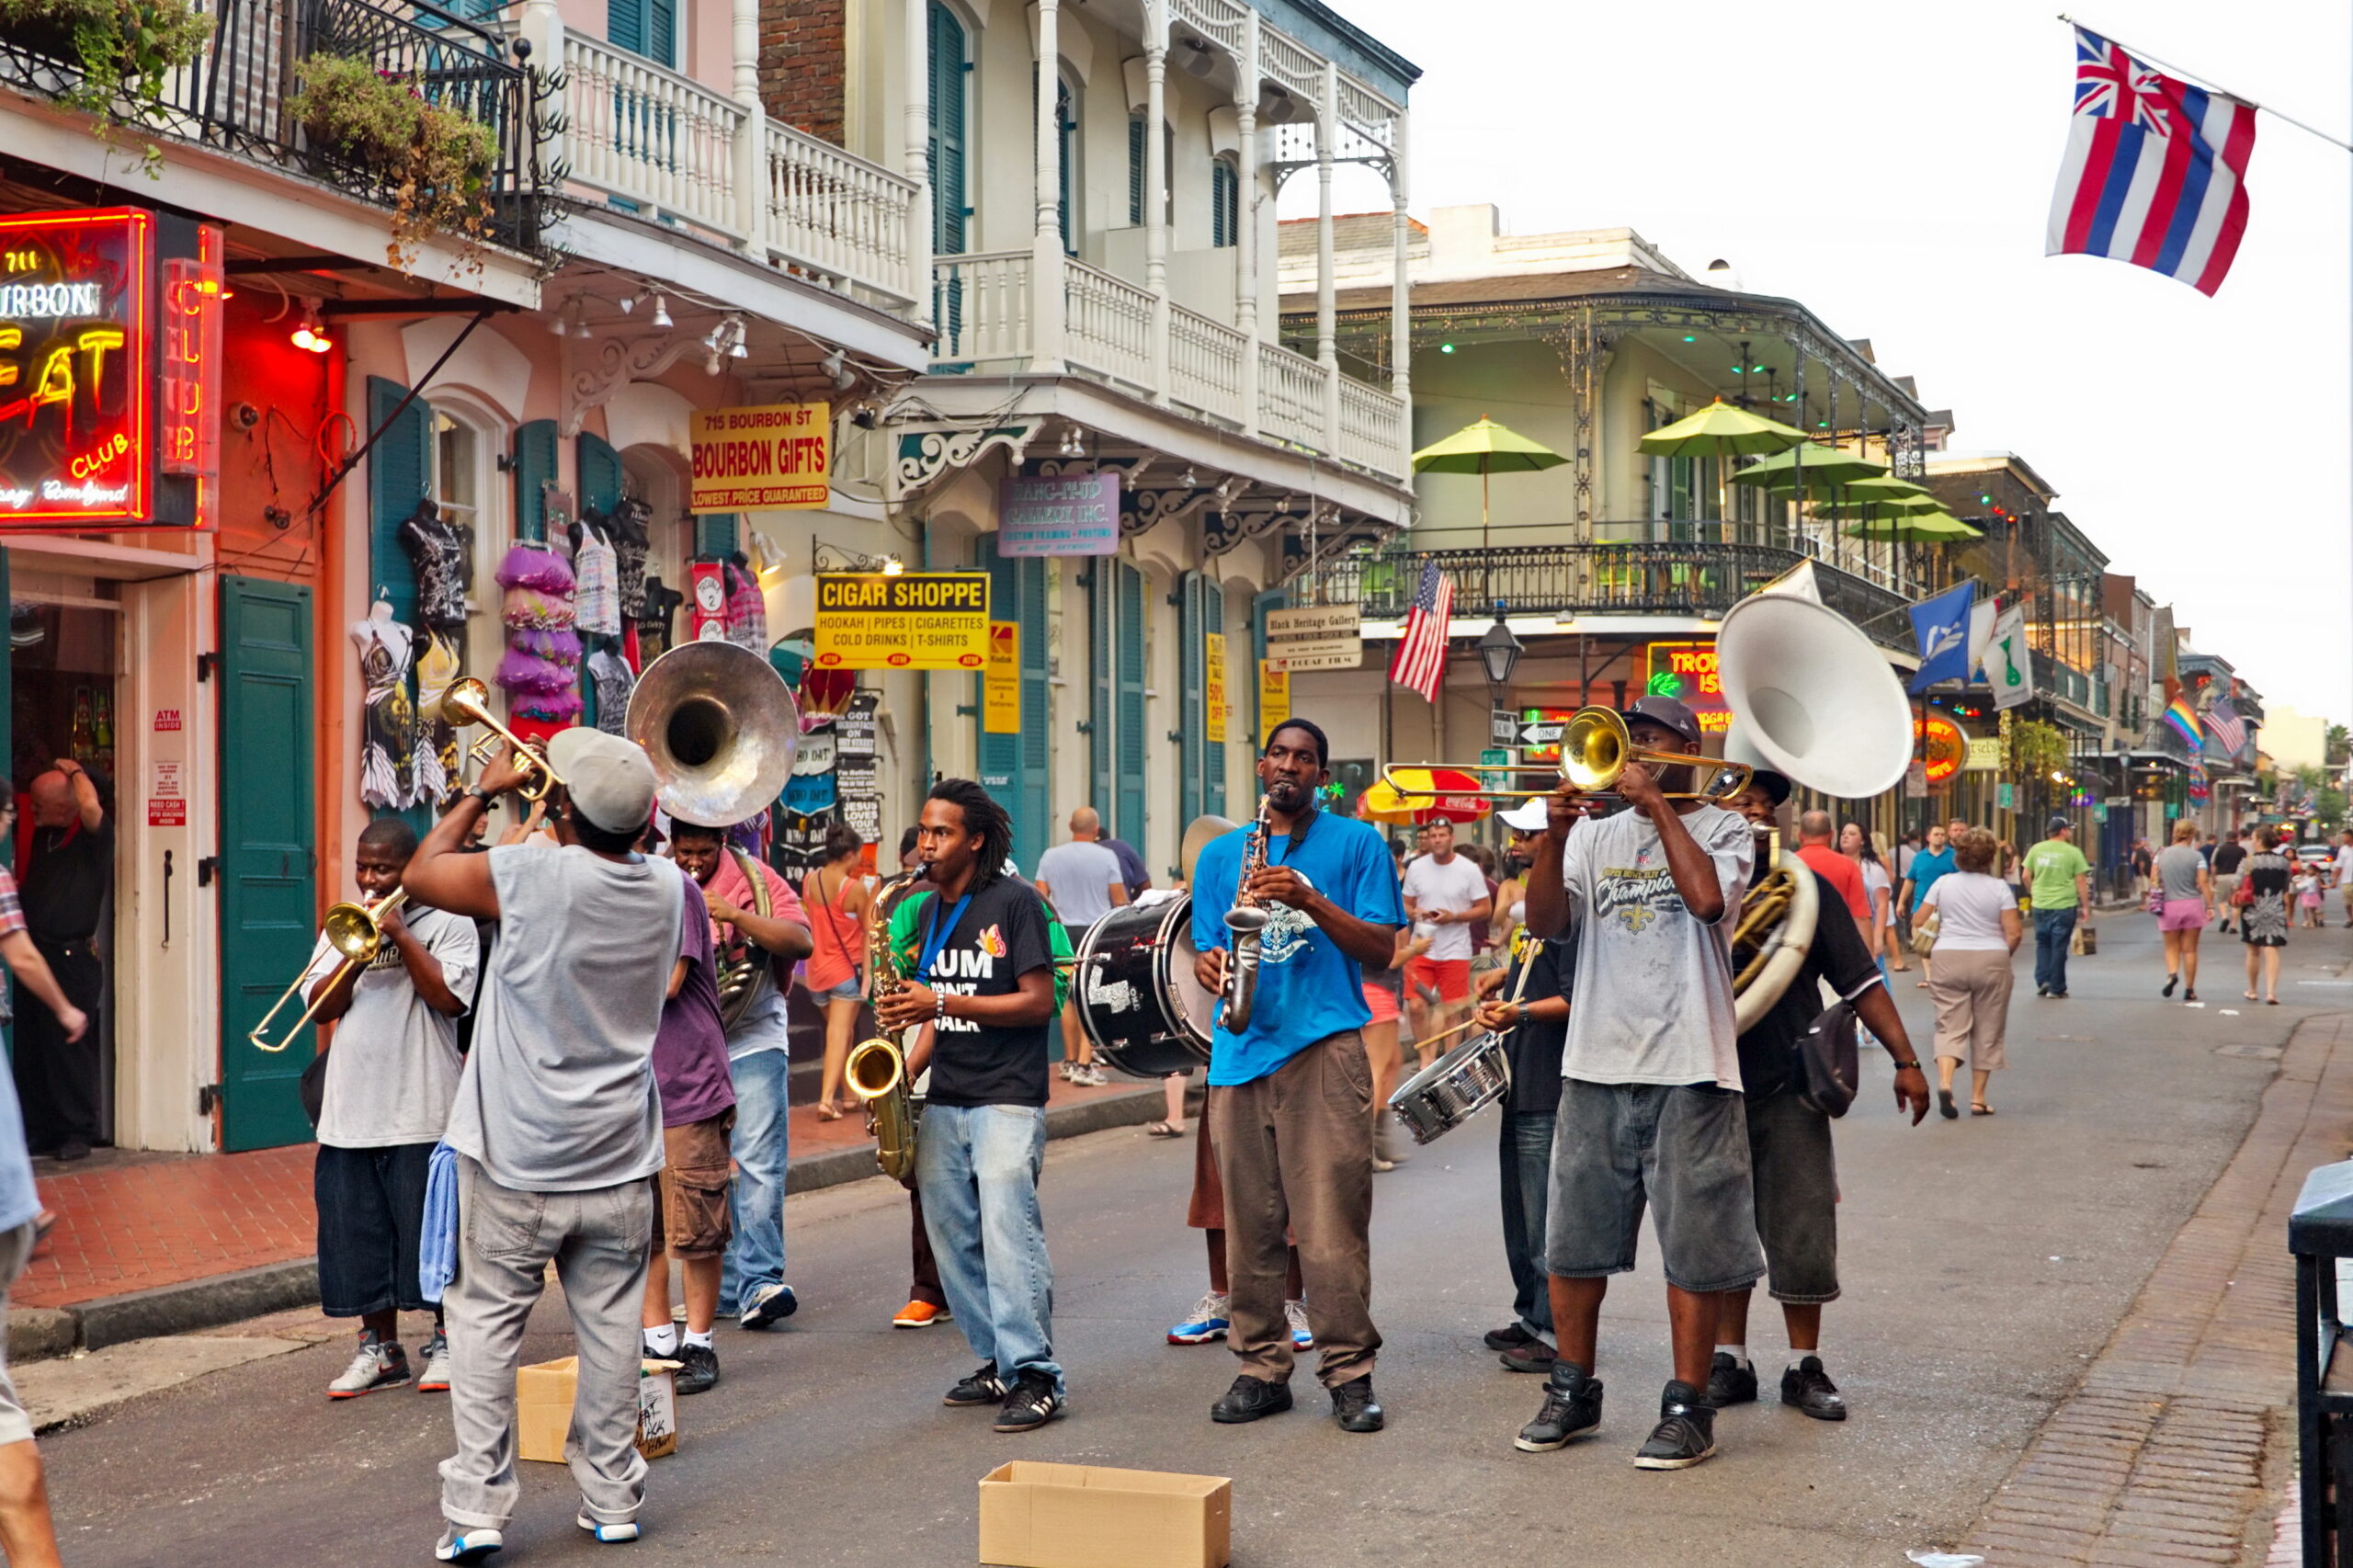 From Jazz to Civil Rights: Walk through Tremé’s African-American and Creole heritage